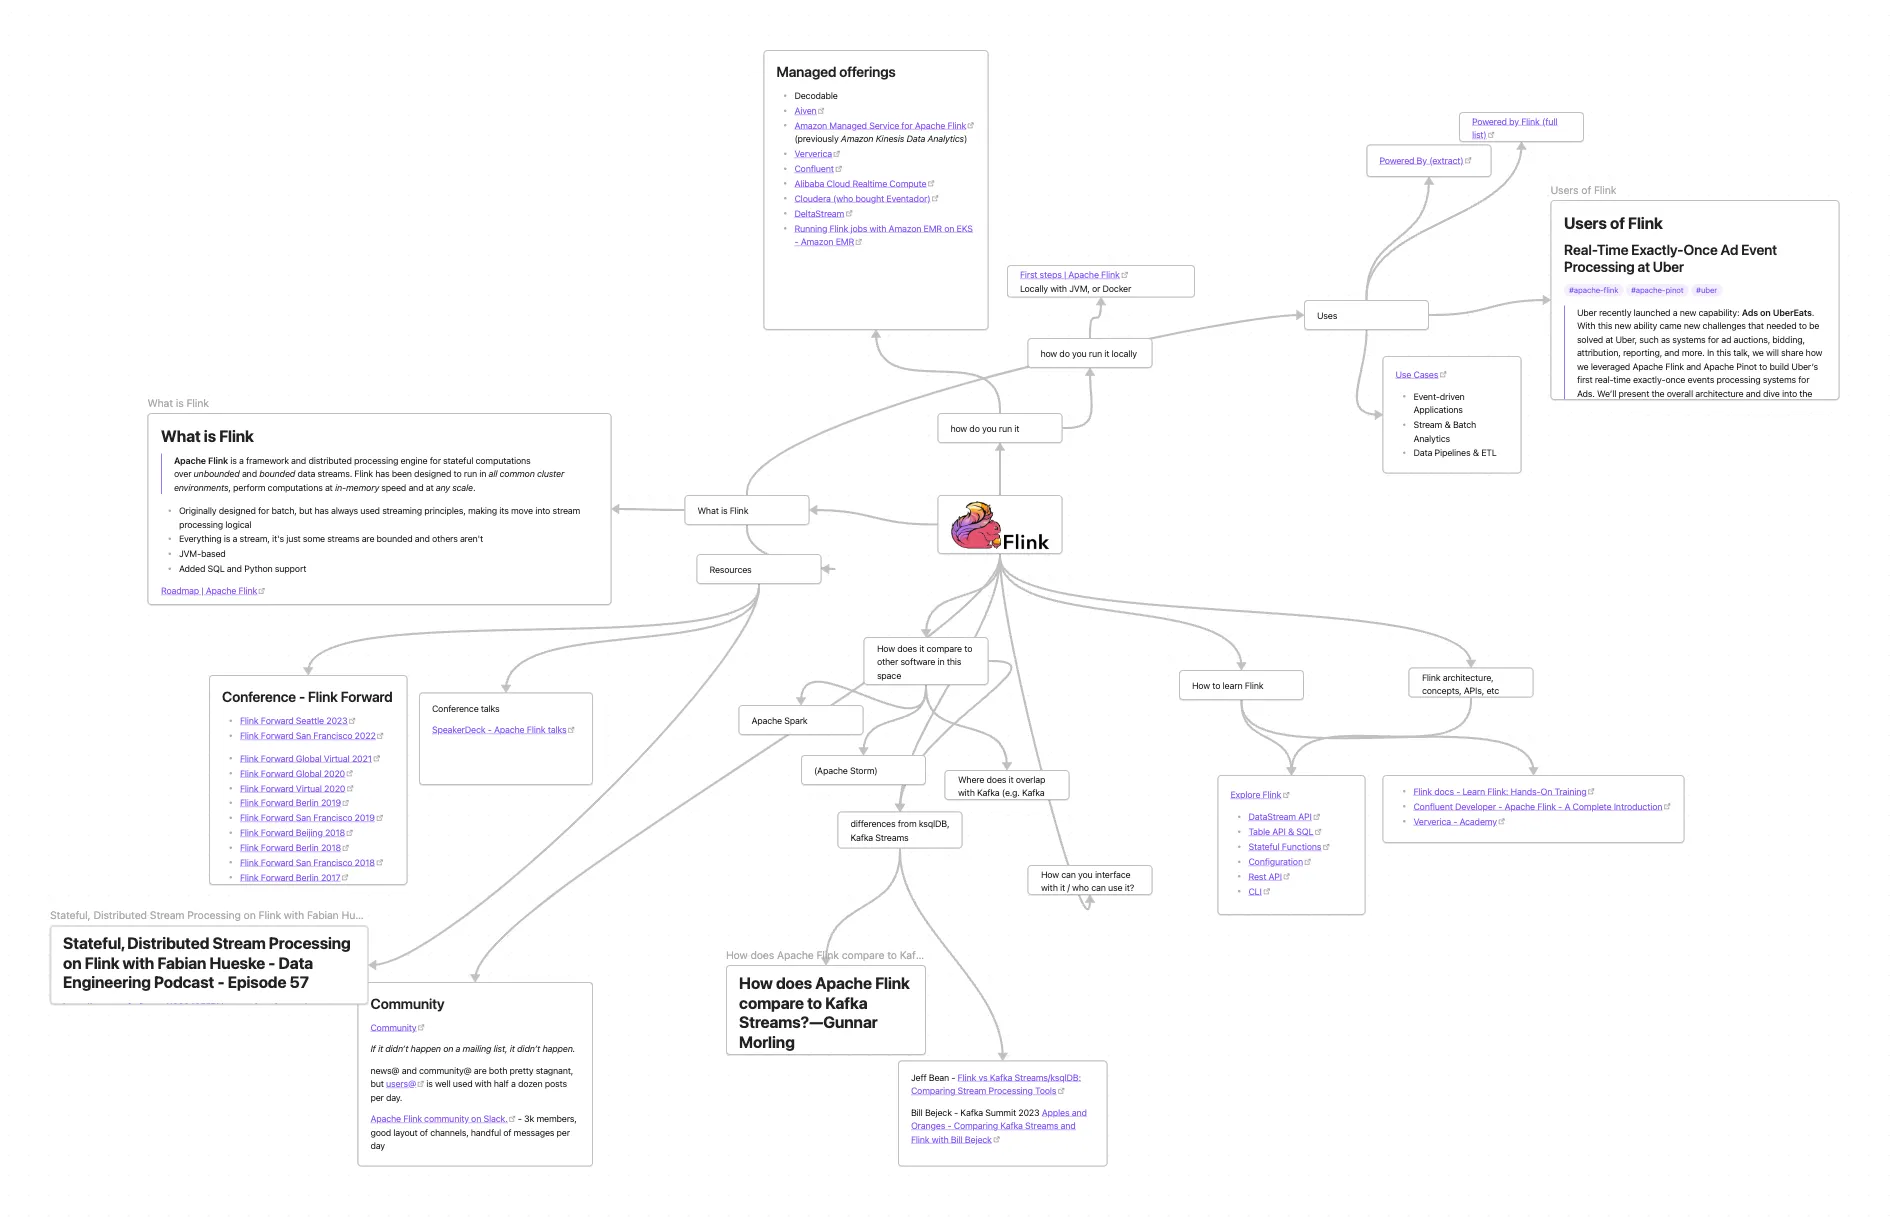 A mindmap of the areas of Apache Flink about which I want to learn